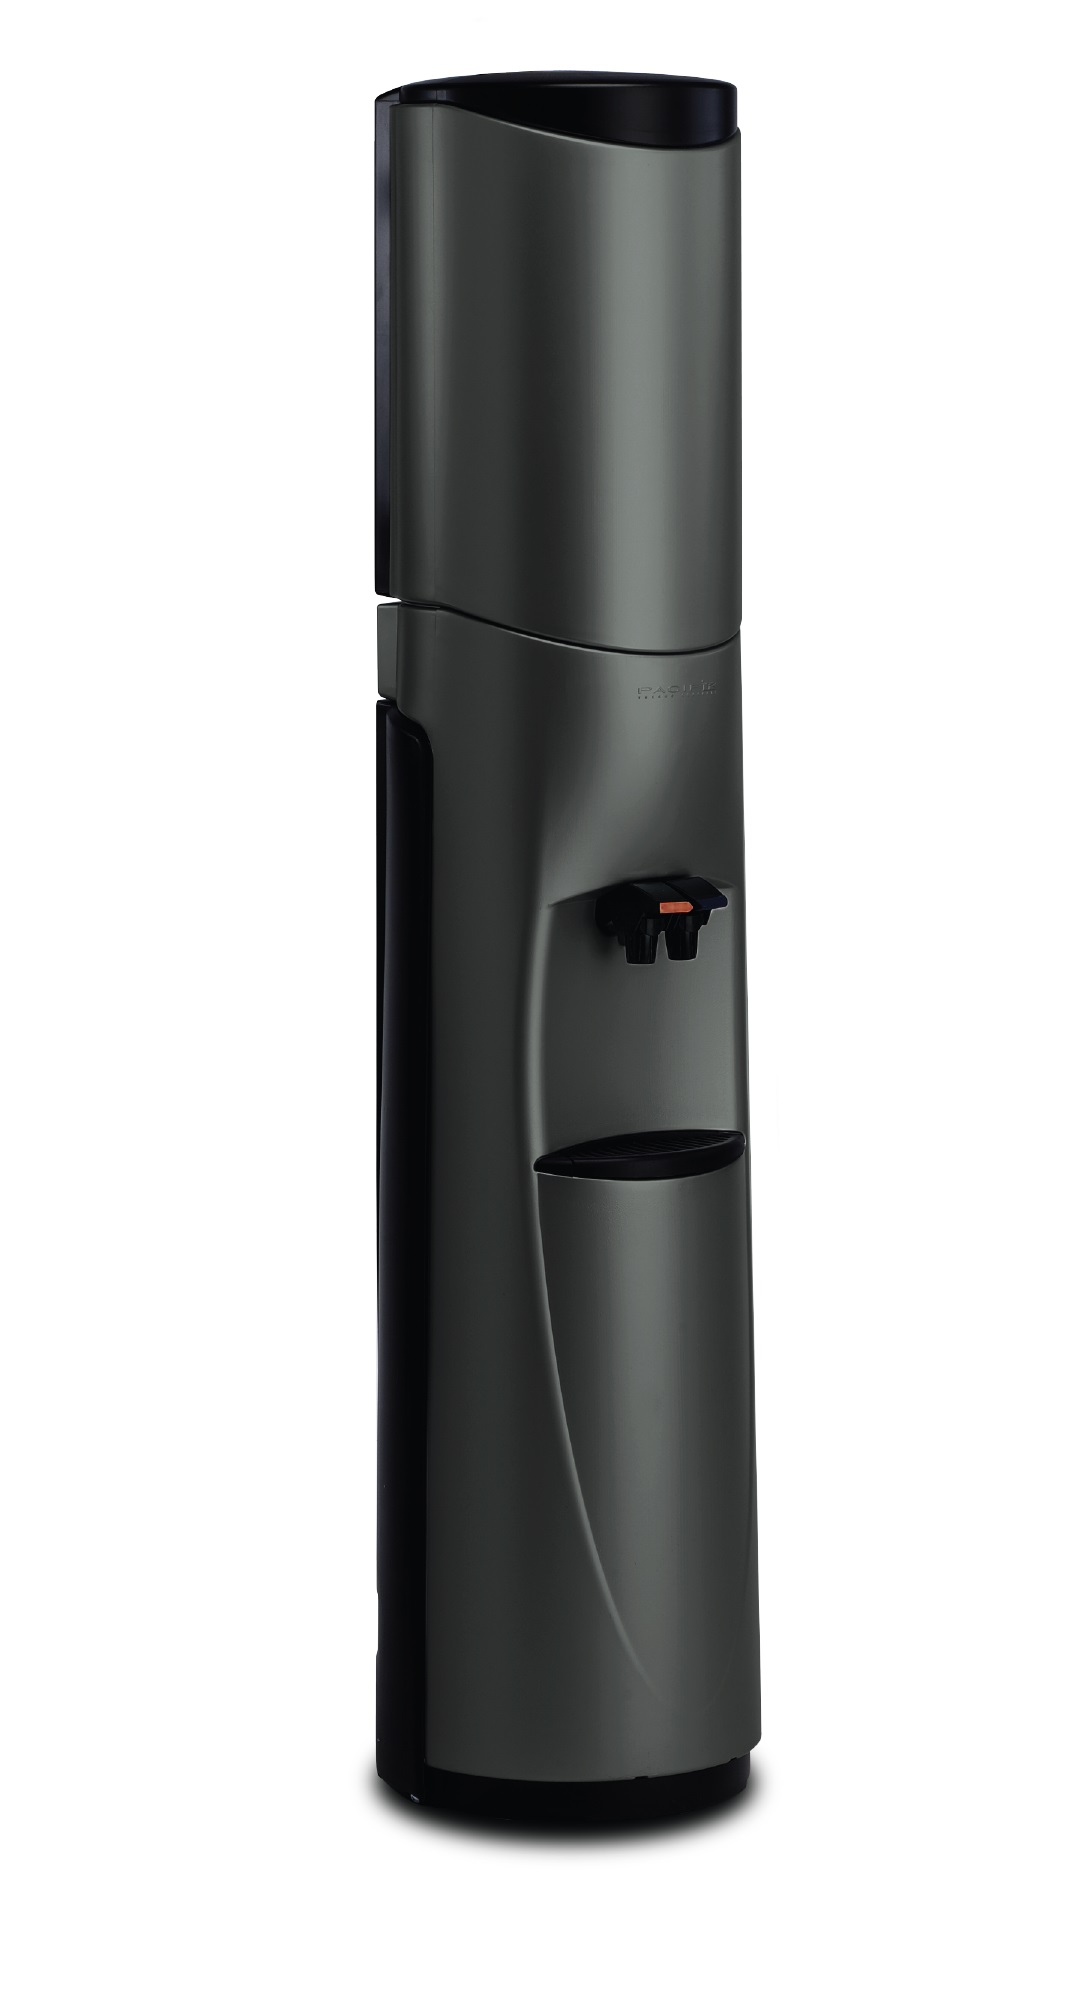 Pacifik Water Cooler - Charcoal with Black Trim - New technology for a whole new kind of bottled water cooler, Hot & Cold